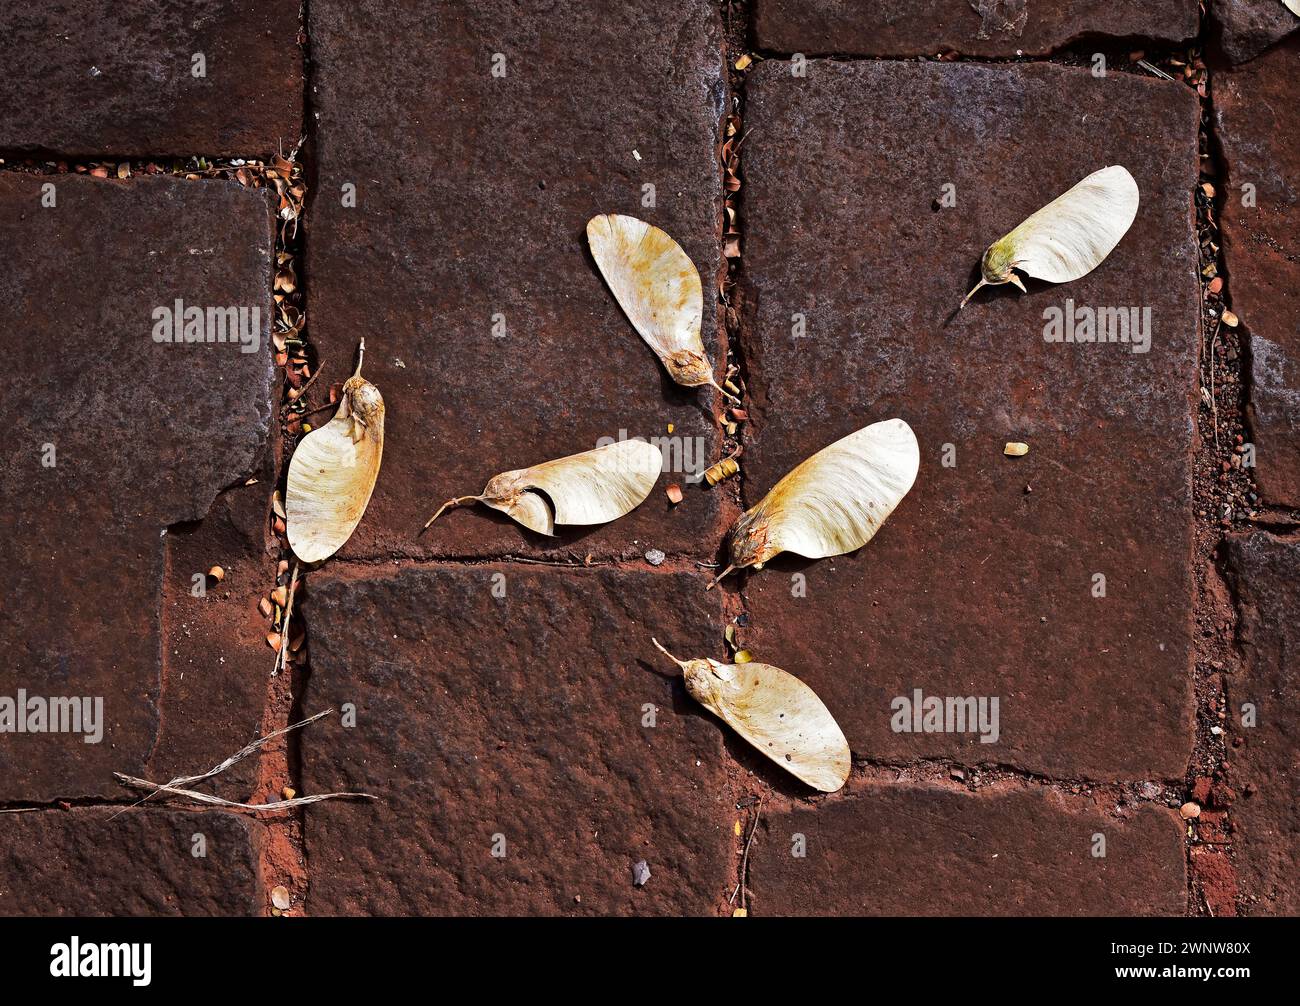 Winged seeds on the ground Stock Photo